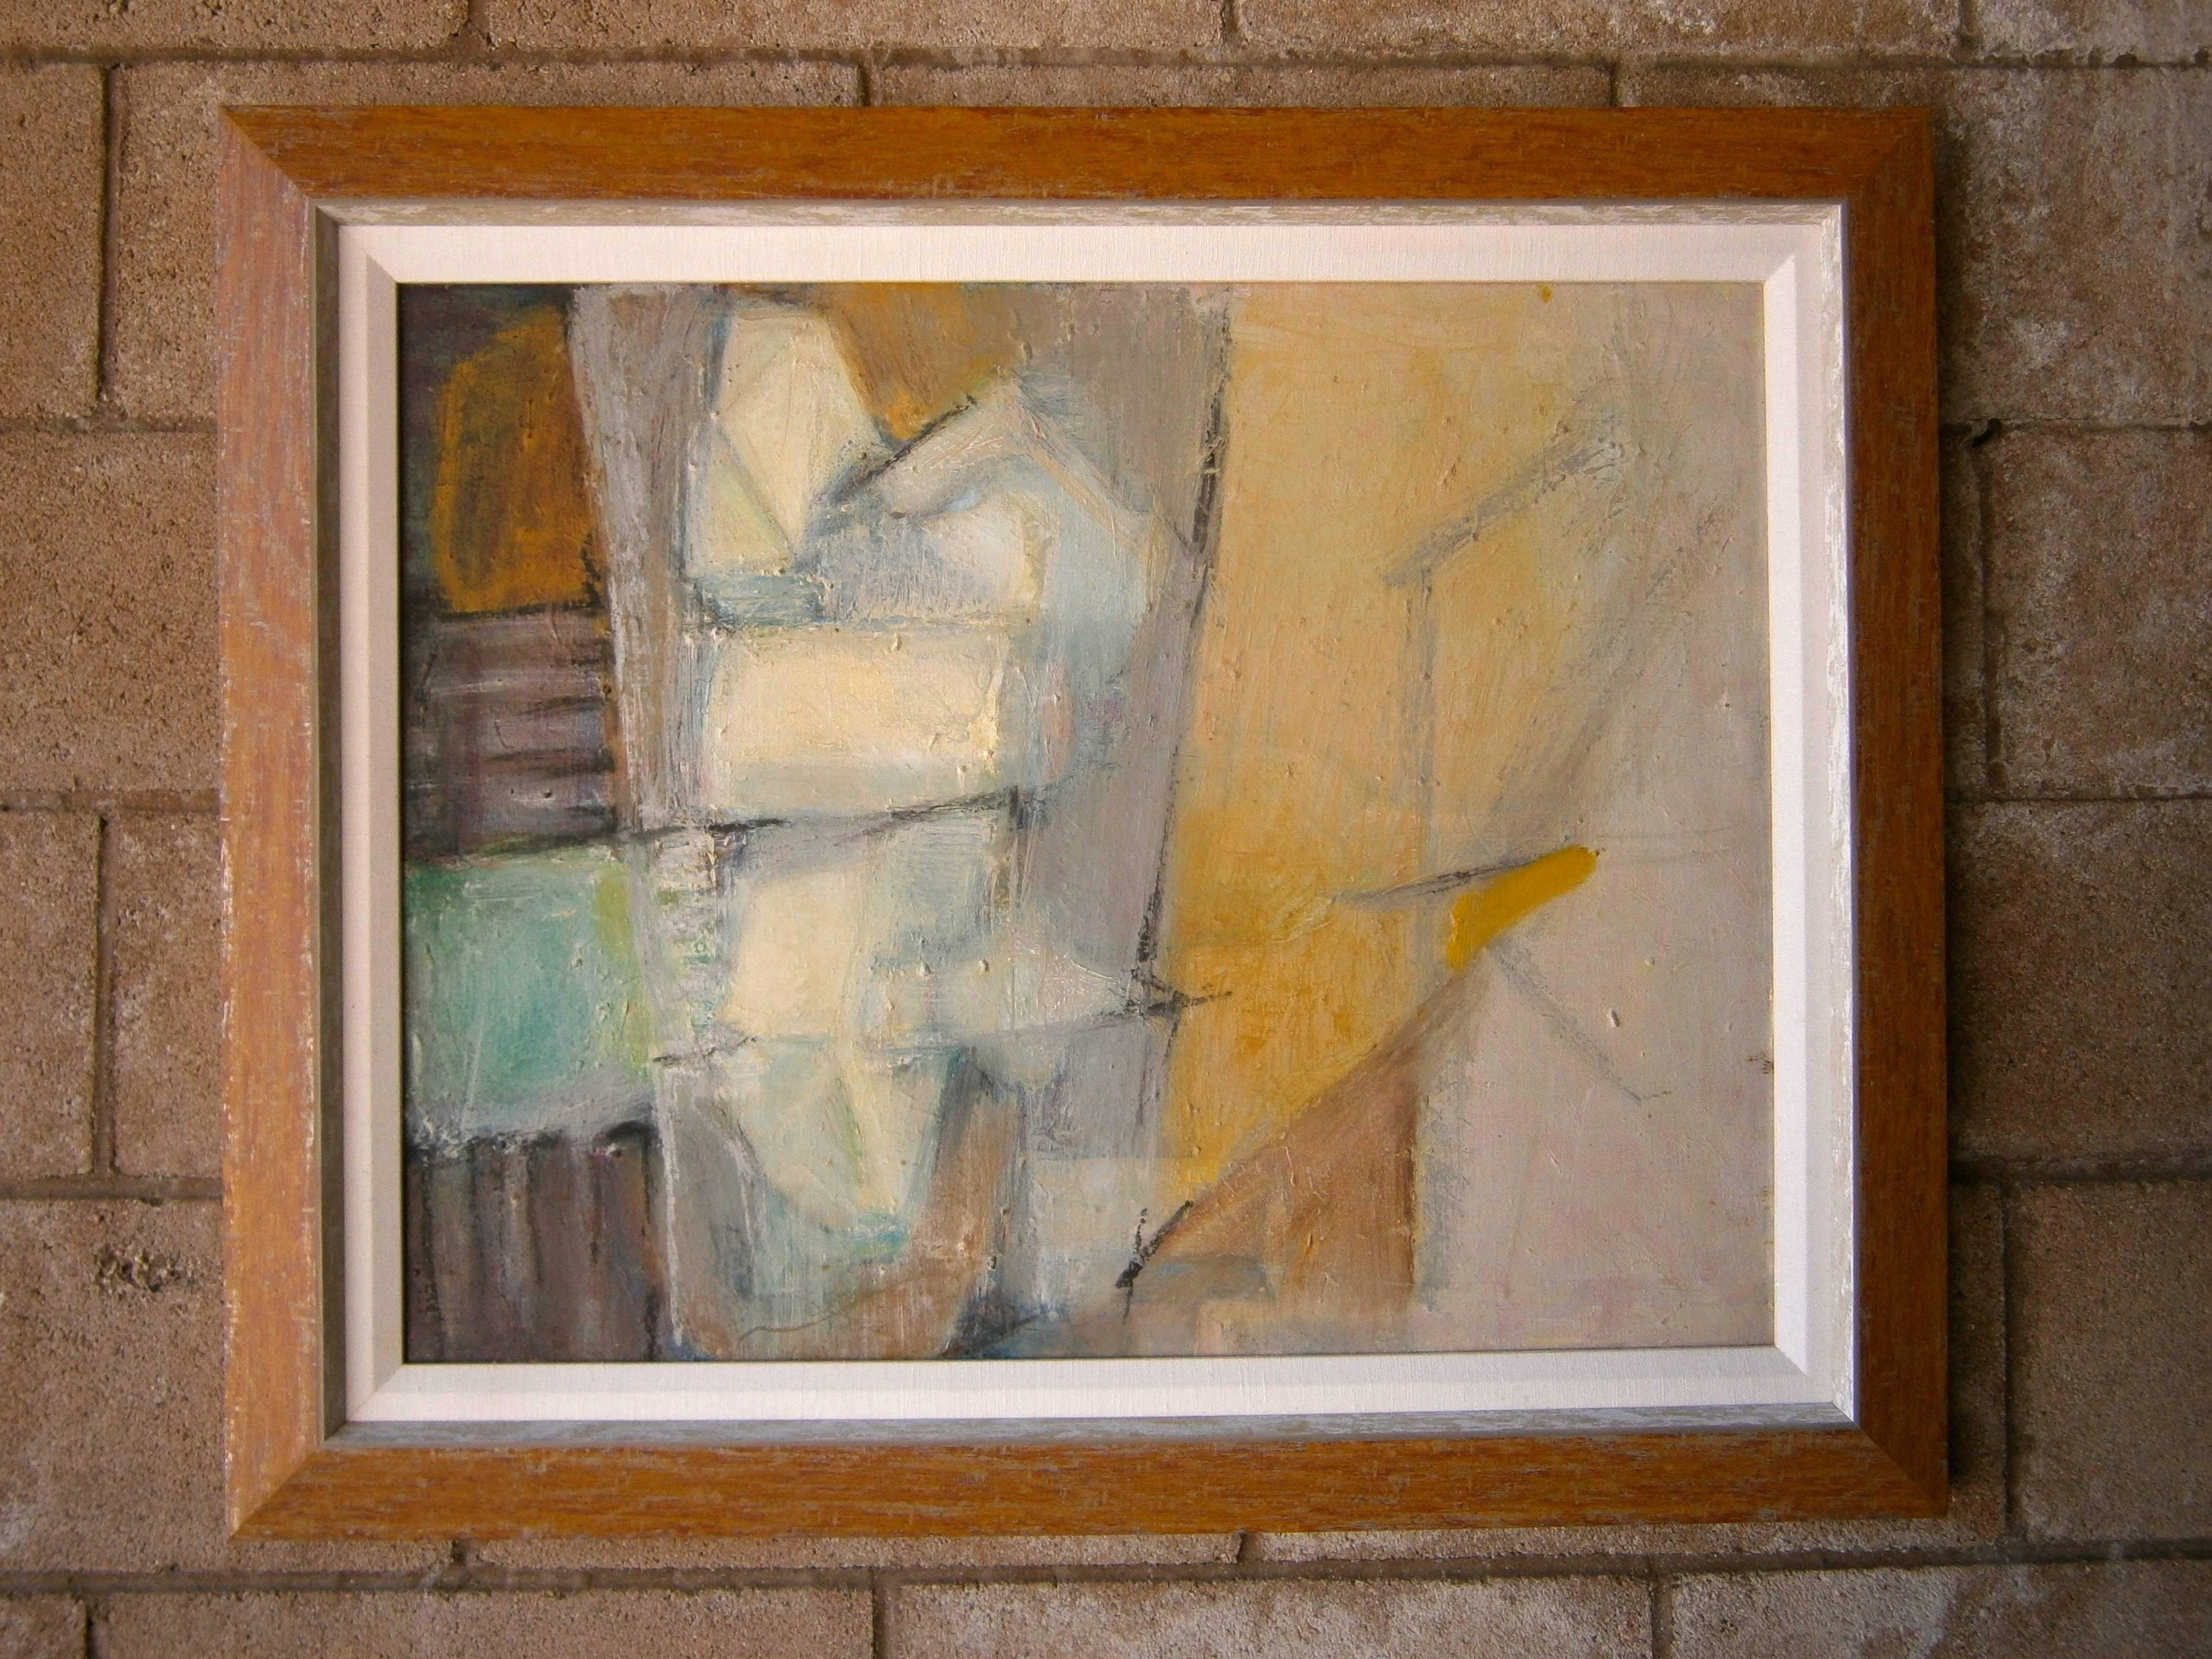 A wonderful unsigned 1960's abstract Expressionist oil on canvas painting
dating most likely to the 1960's. Newly cleaned and beautifully custom framed.